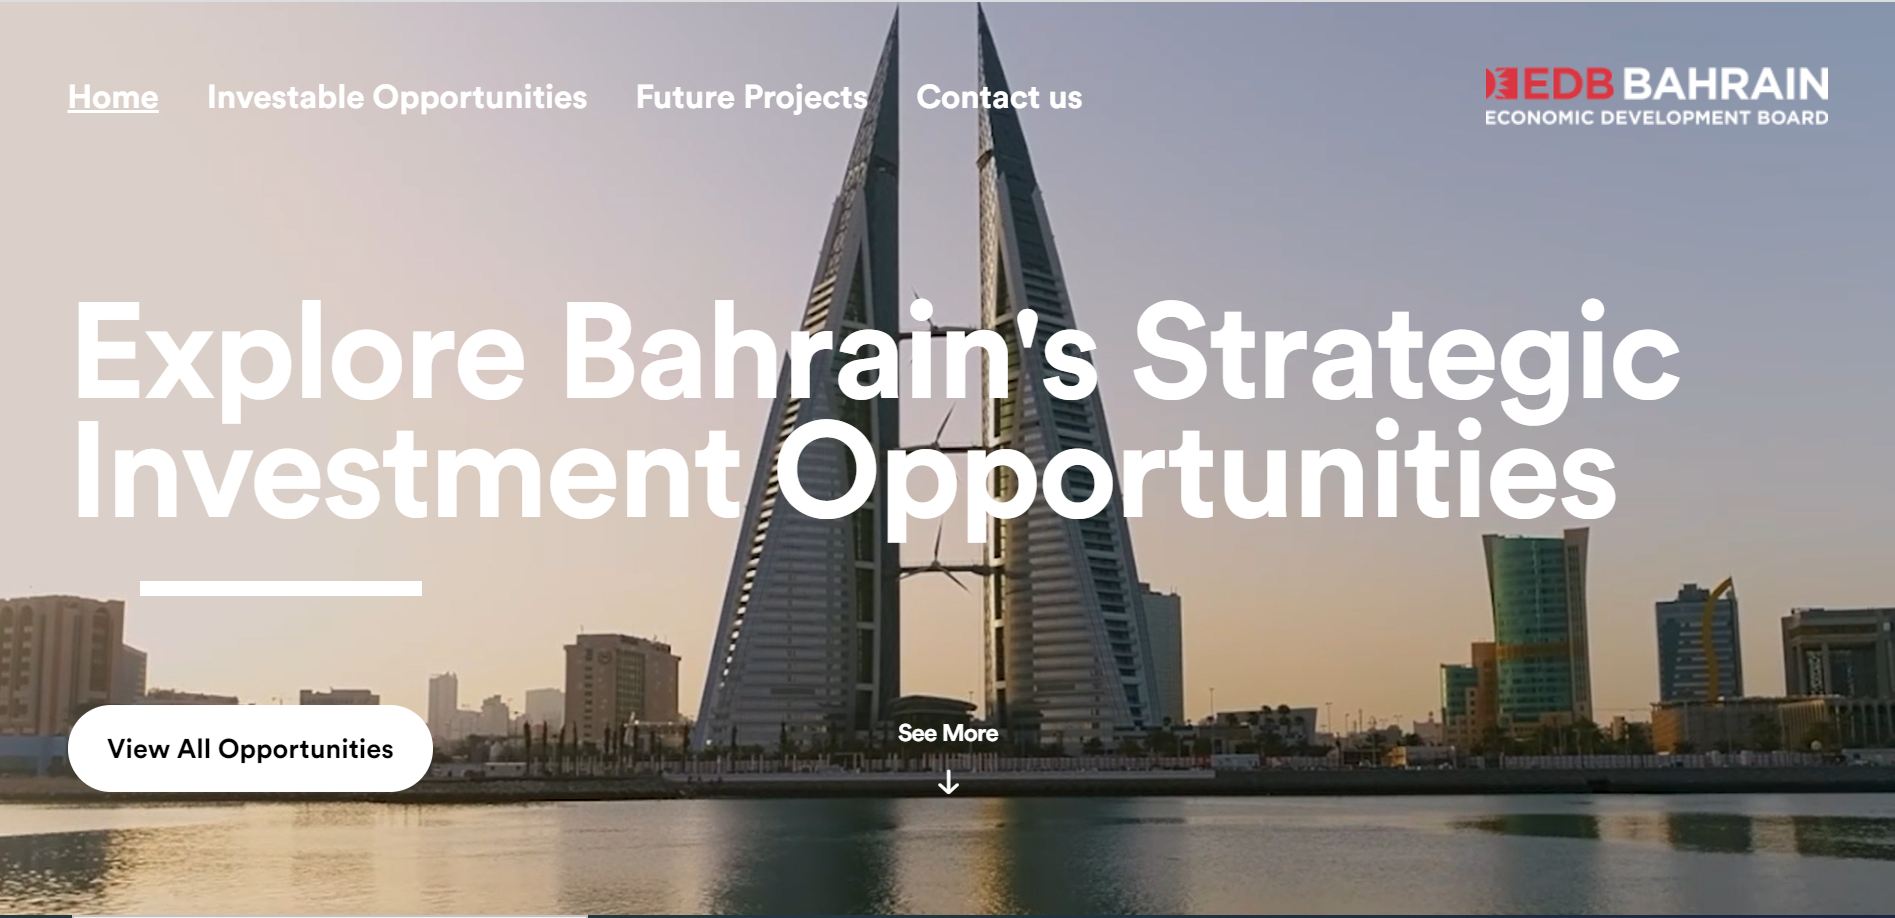 BAHRAIN LAUNCHES INVESTMENT PLATFORM ENABLING INVESTOR ACCESS TO INVESTMENT OPPORTUNITIES IN THE KINGDOM STRATEGIC PROJECTS VALUED OVER USD30 BILLION